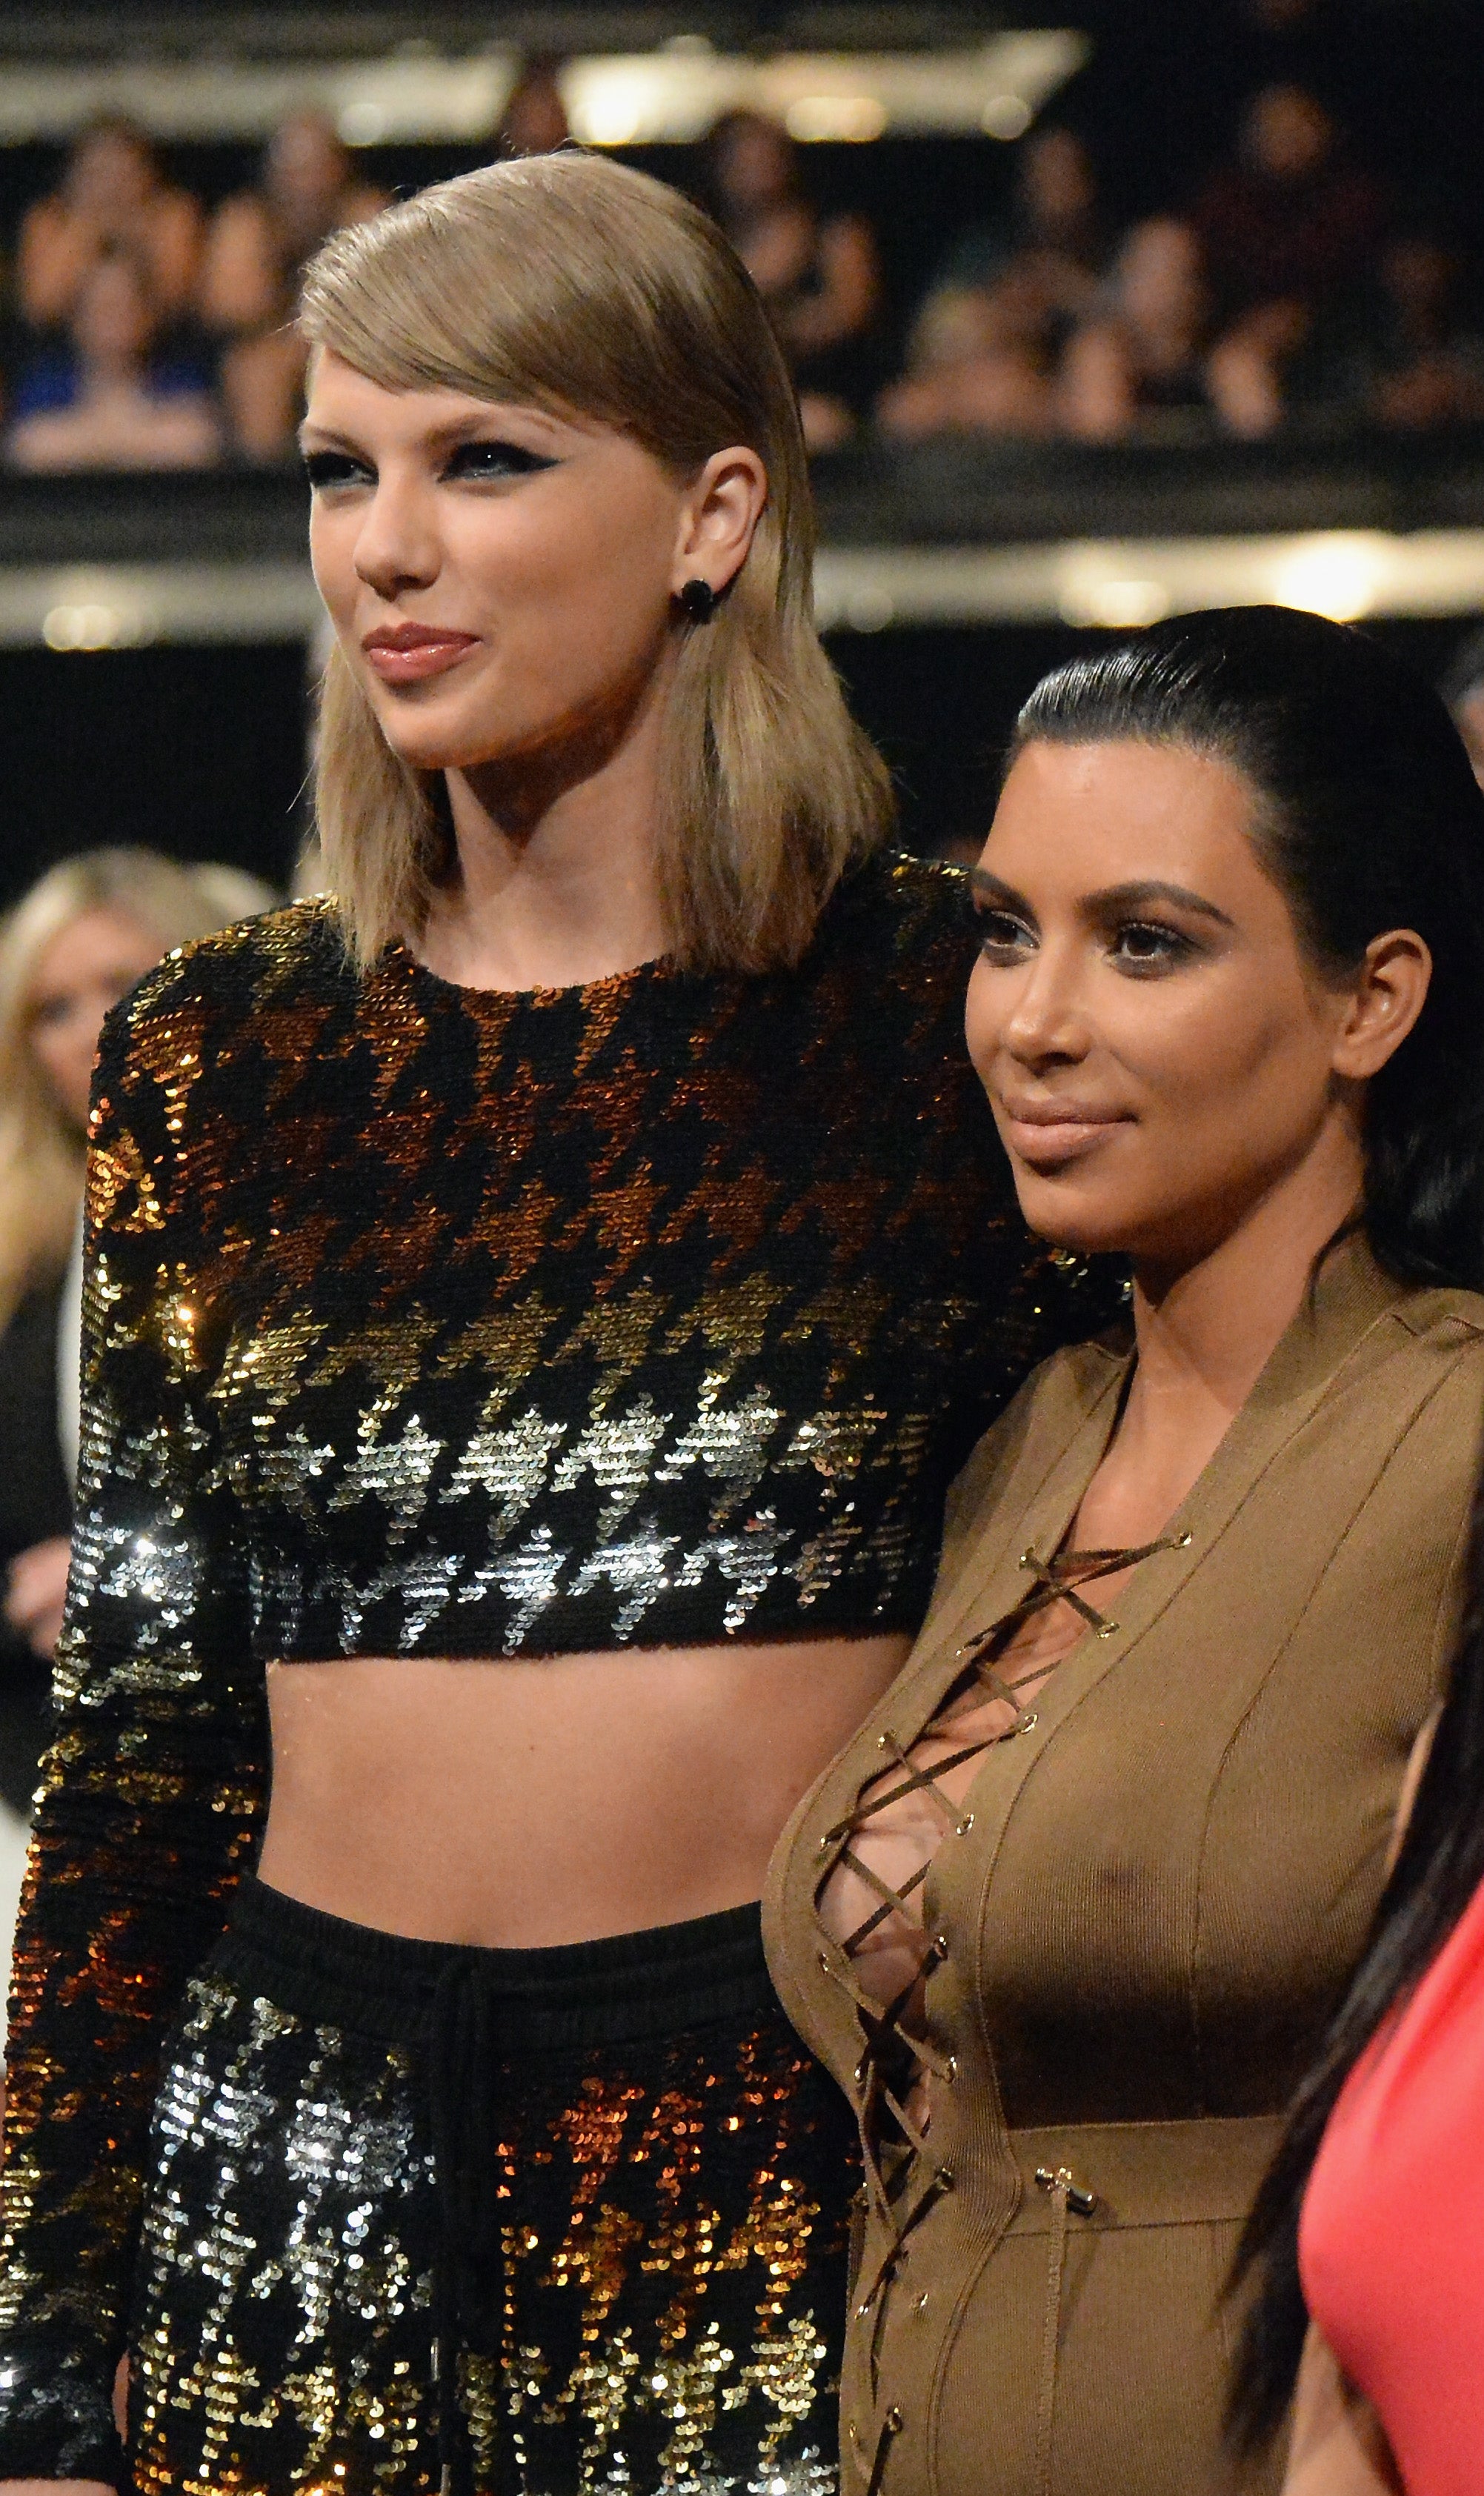 Taylor Swift and Kim Kardashian standing side by side